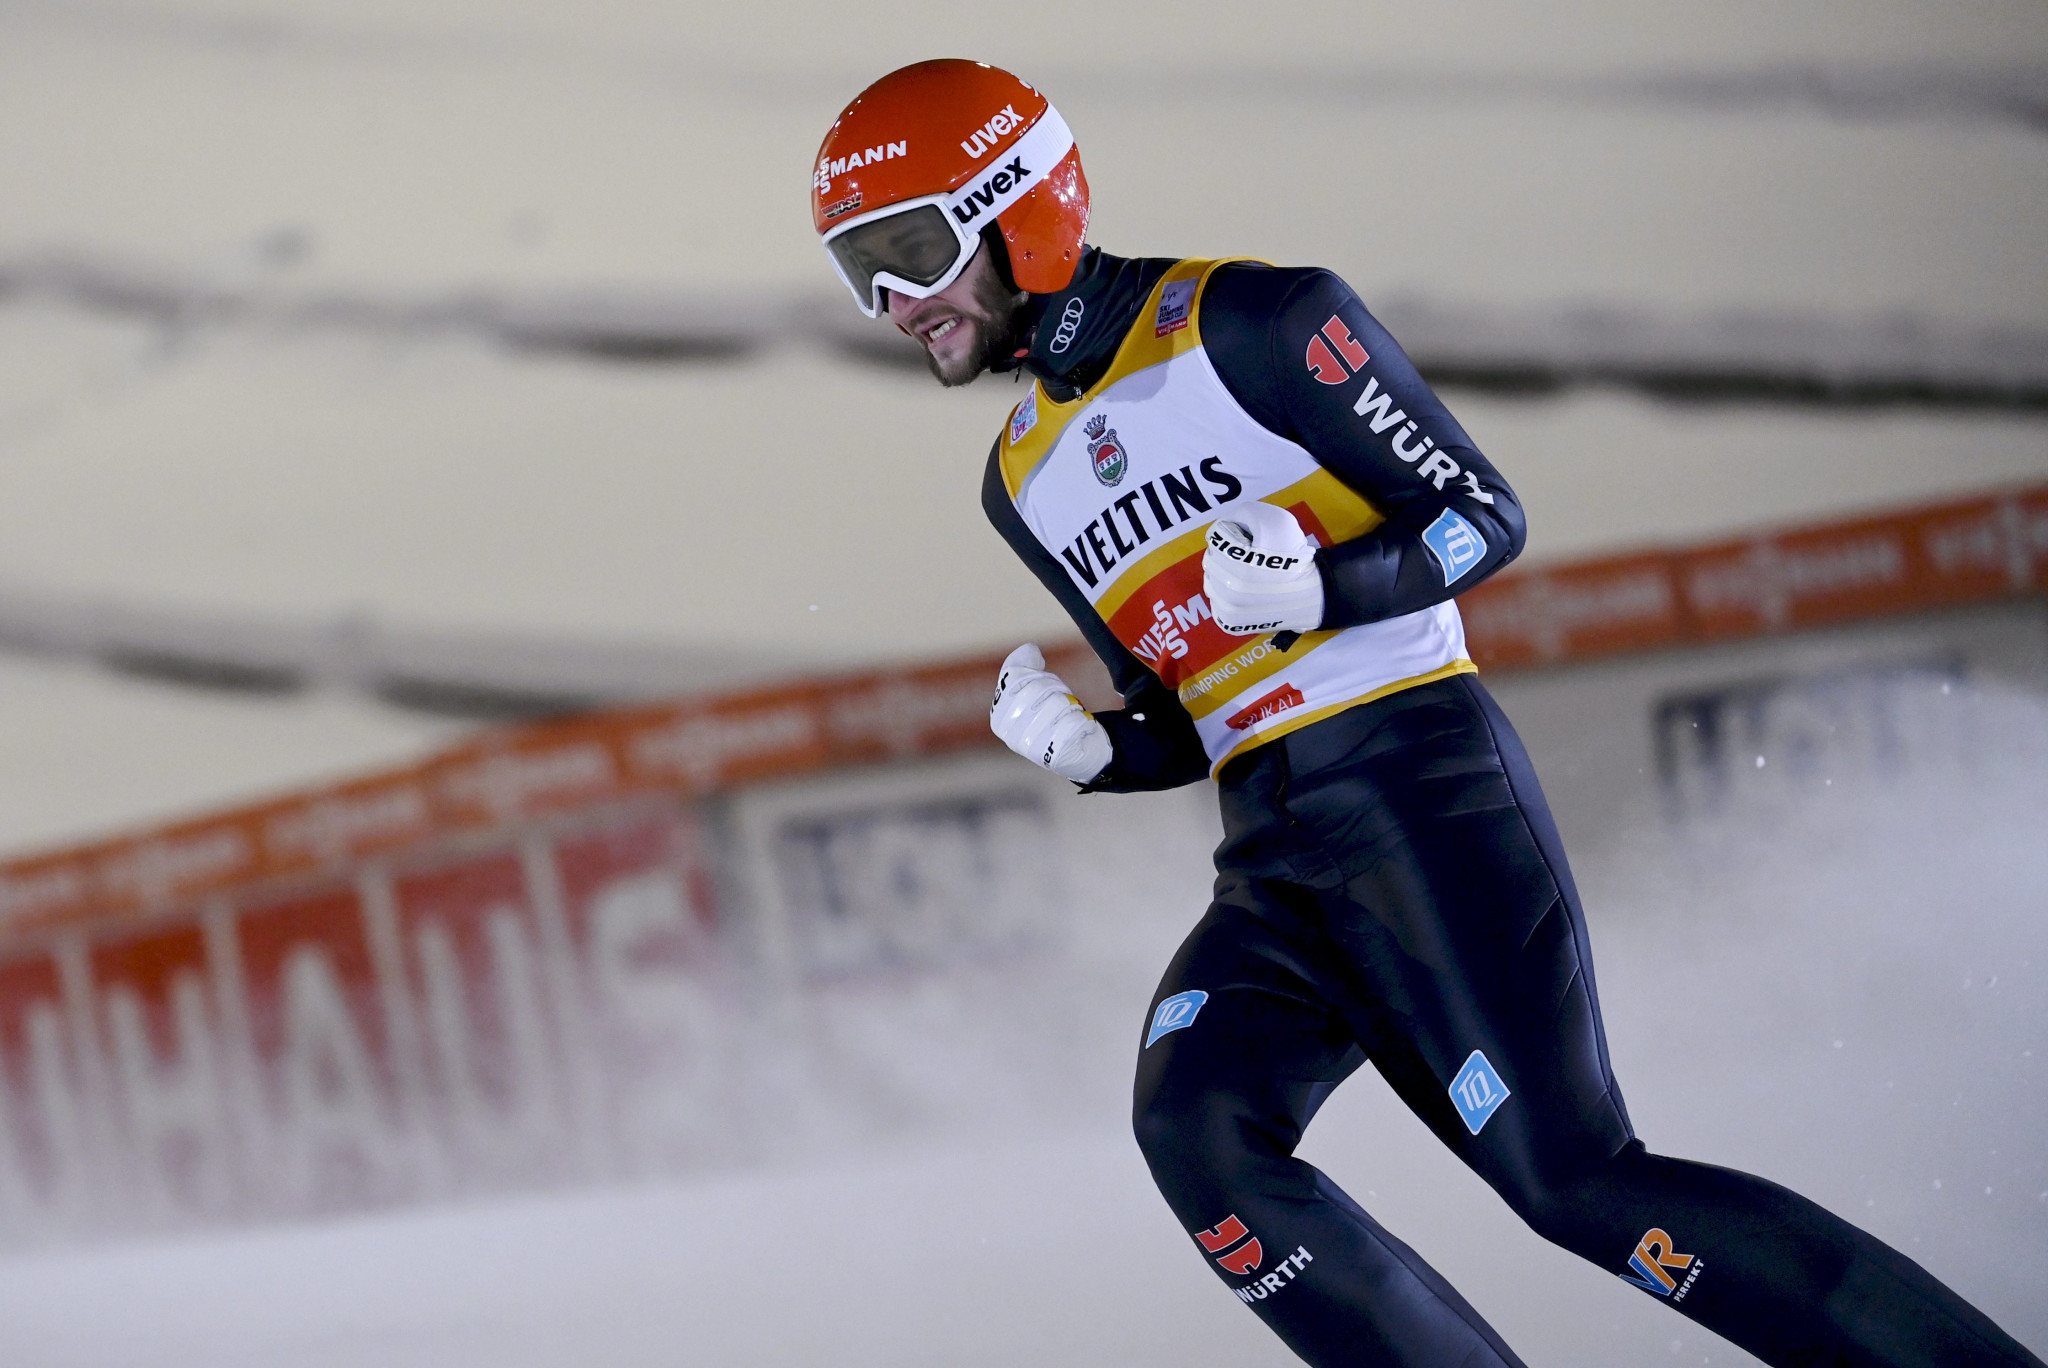 Markus Eisenbichler of Germany will aim to continue his good start to the FIS Ski Jumping World Cup season ©Getty Images